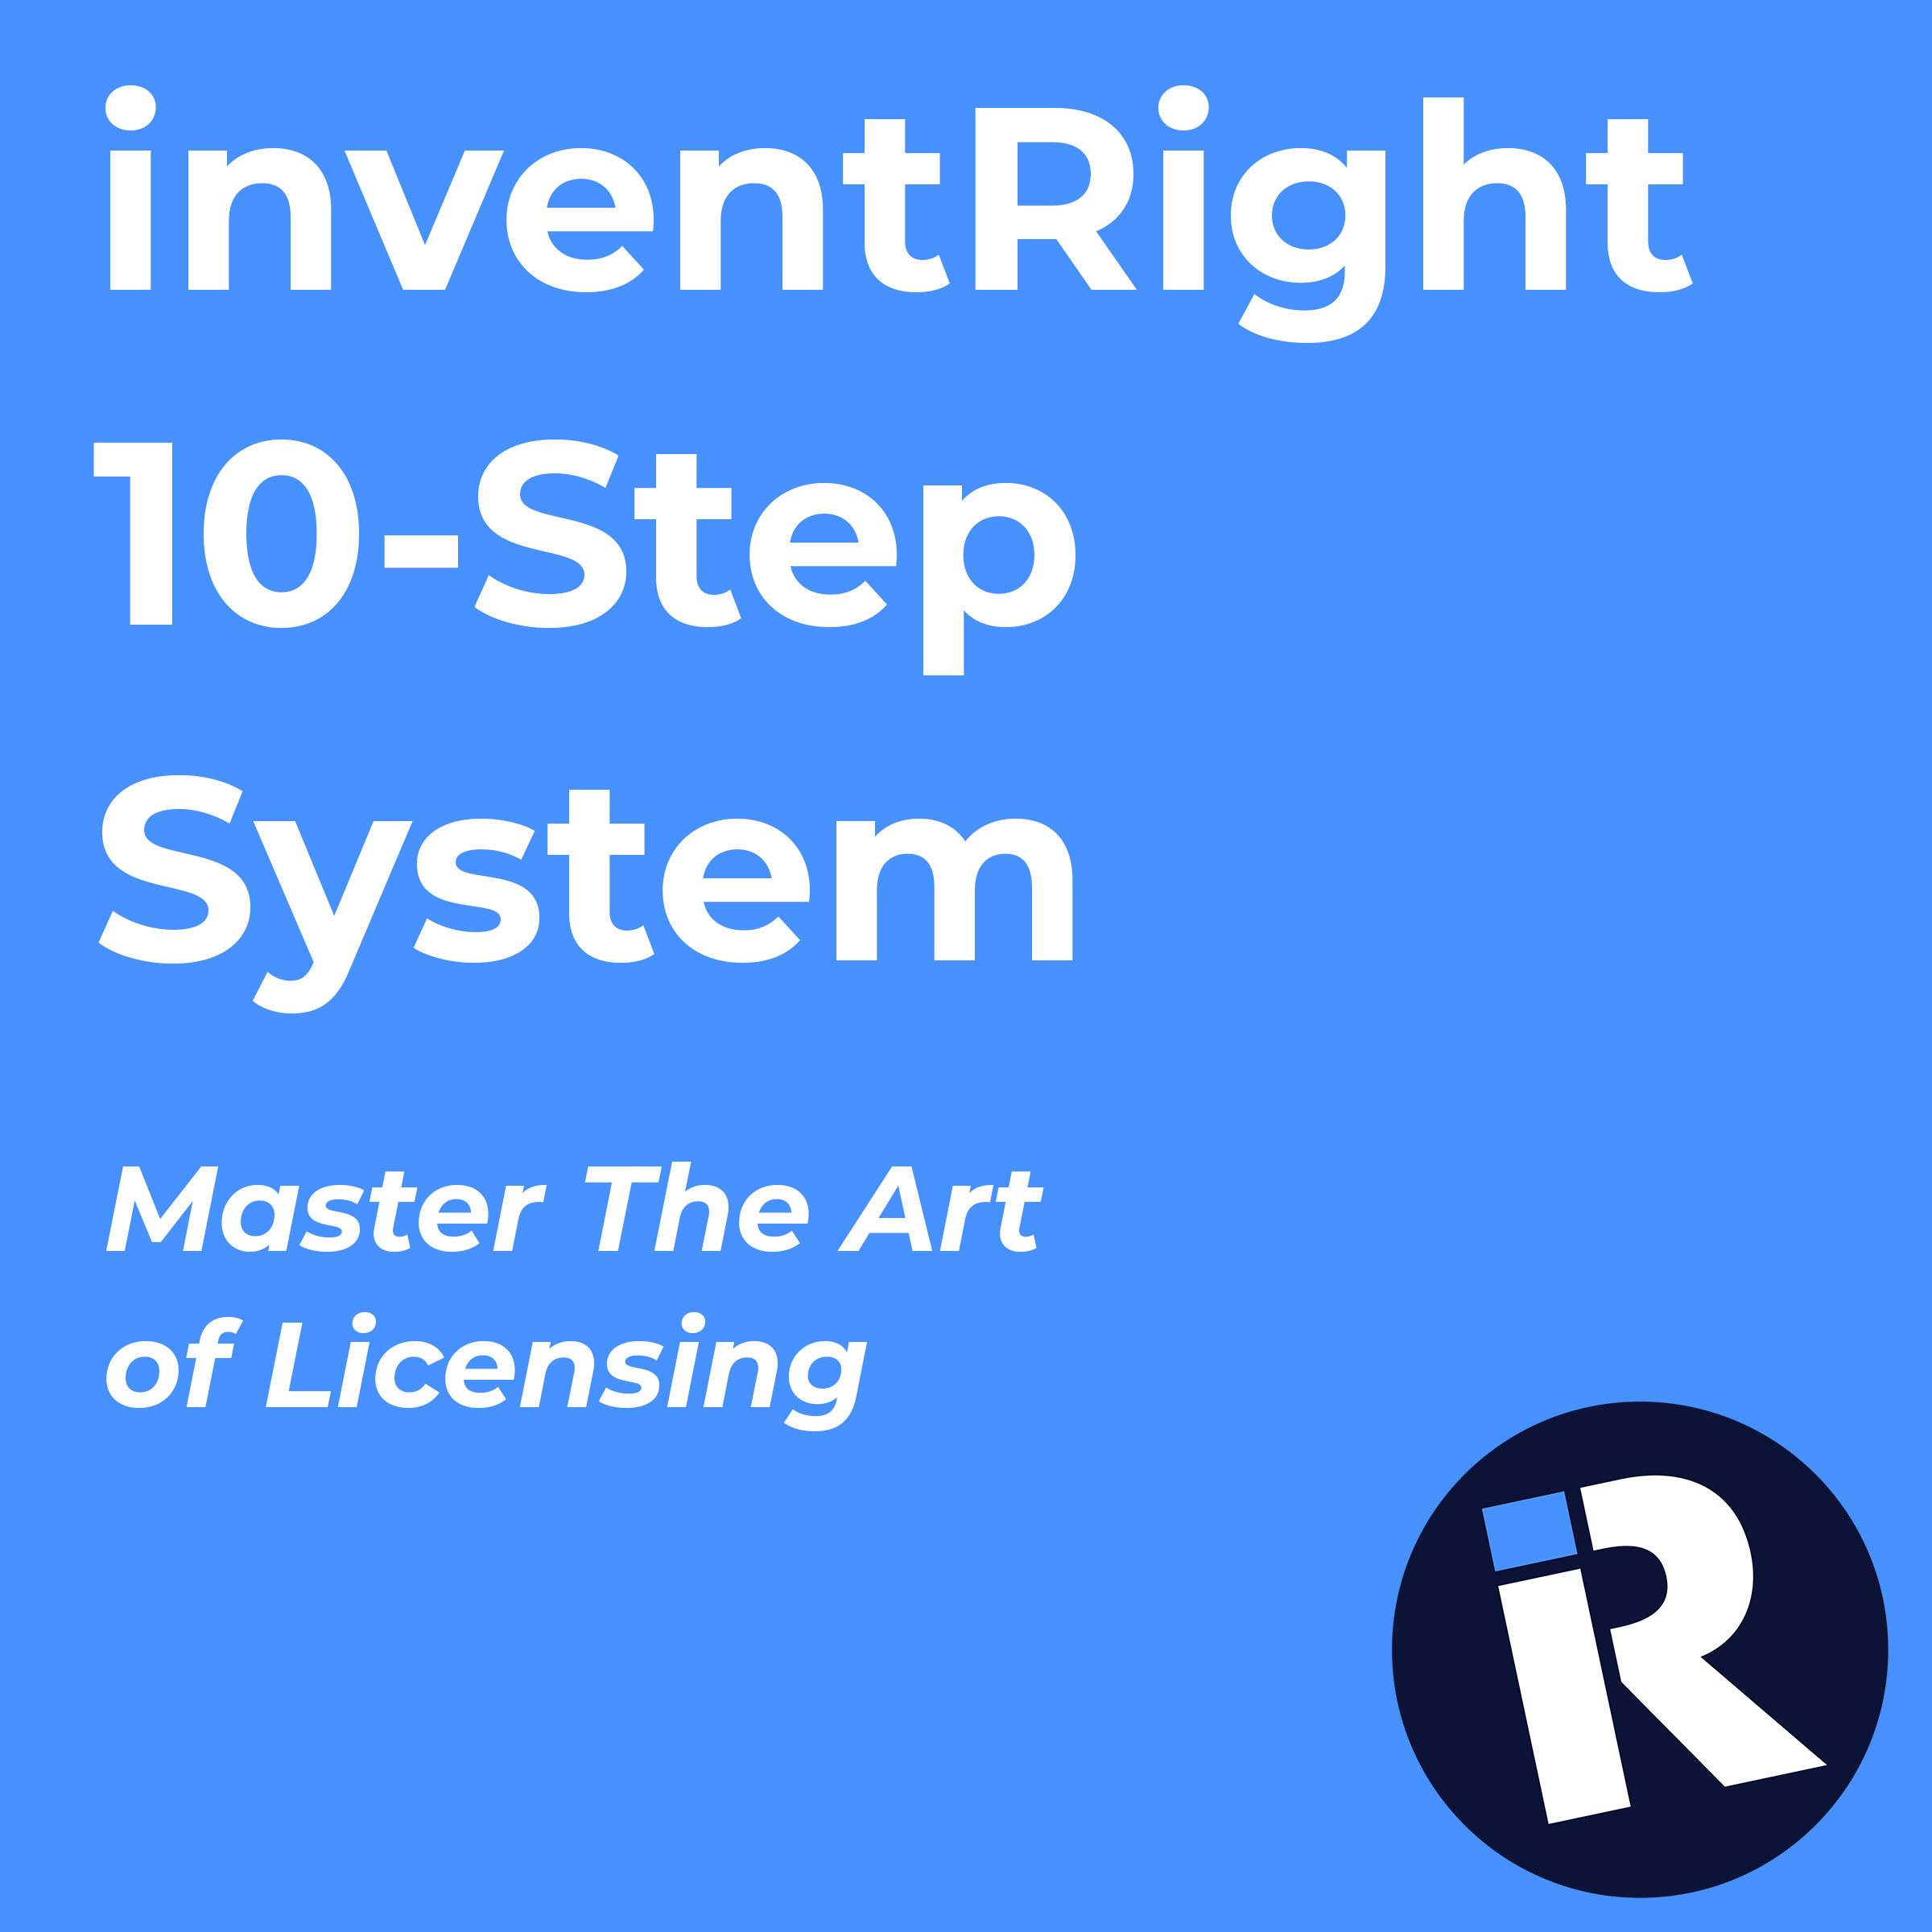 inventRight 10-Step System